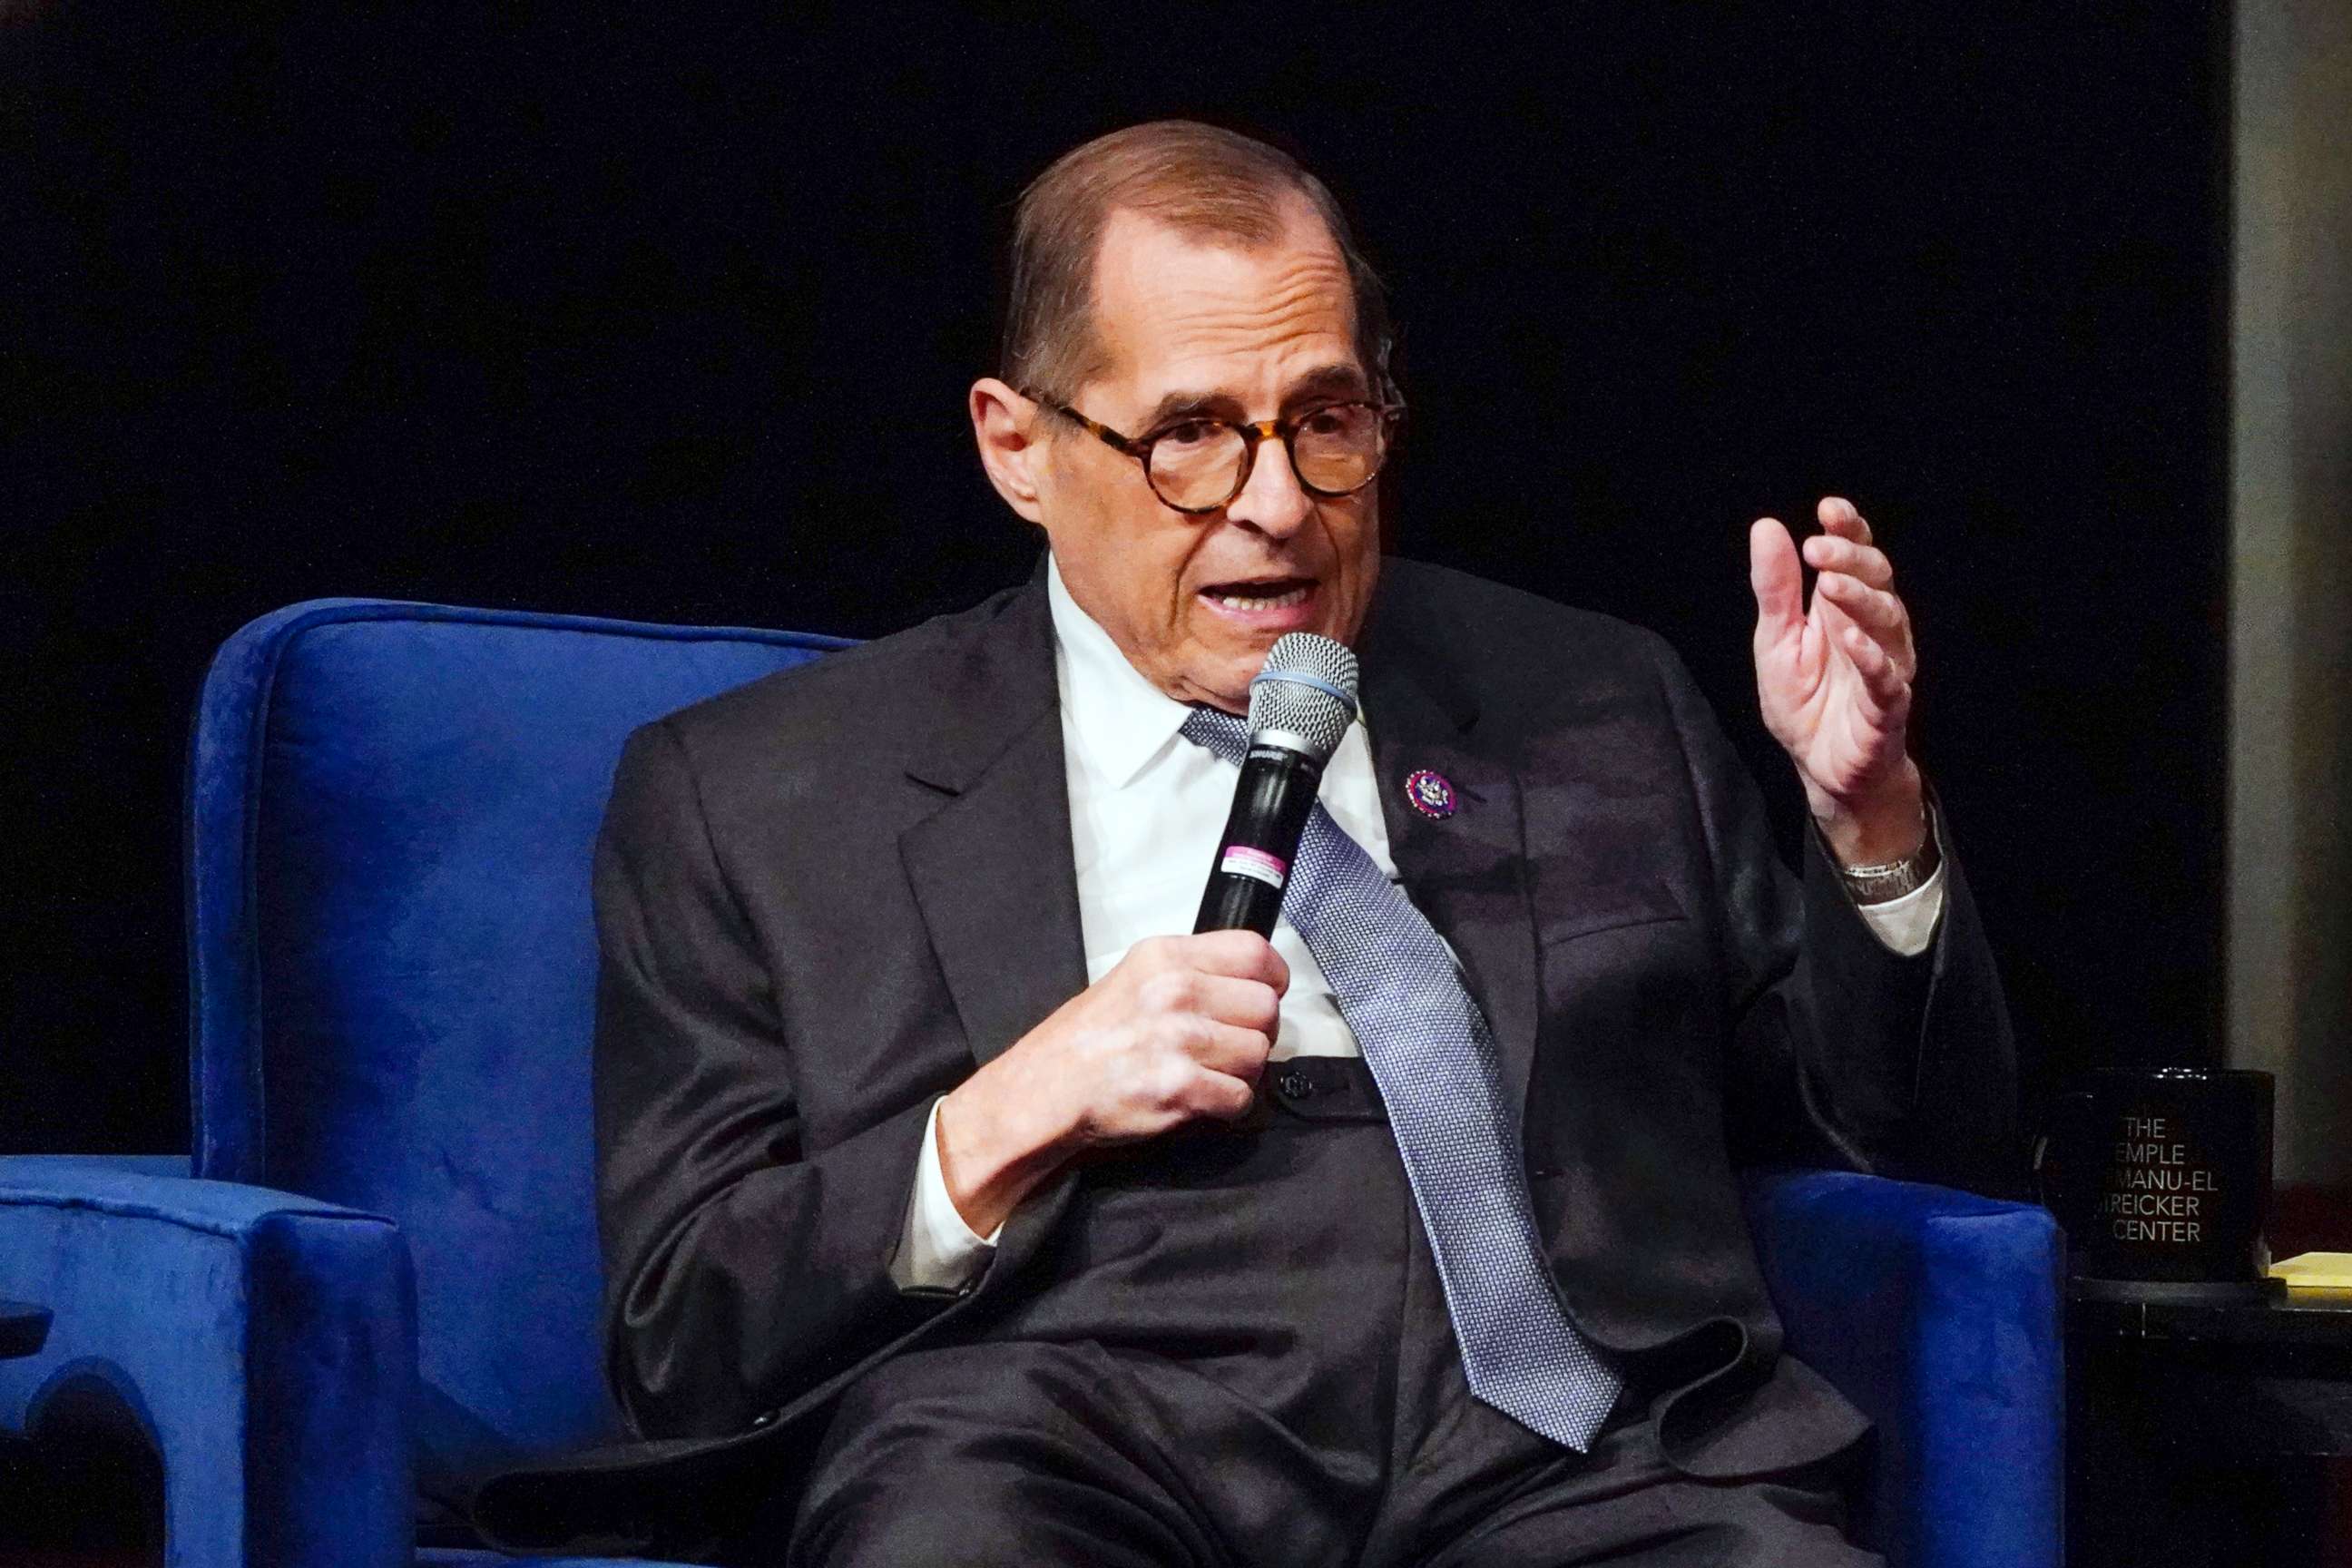 PHOTO: Rep. Jerry Nadler speaks at the NY-12 Candidate Forum Wednesday, Aug. 10, 2022, in New York.